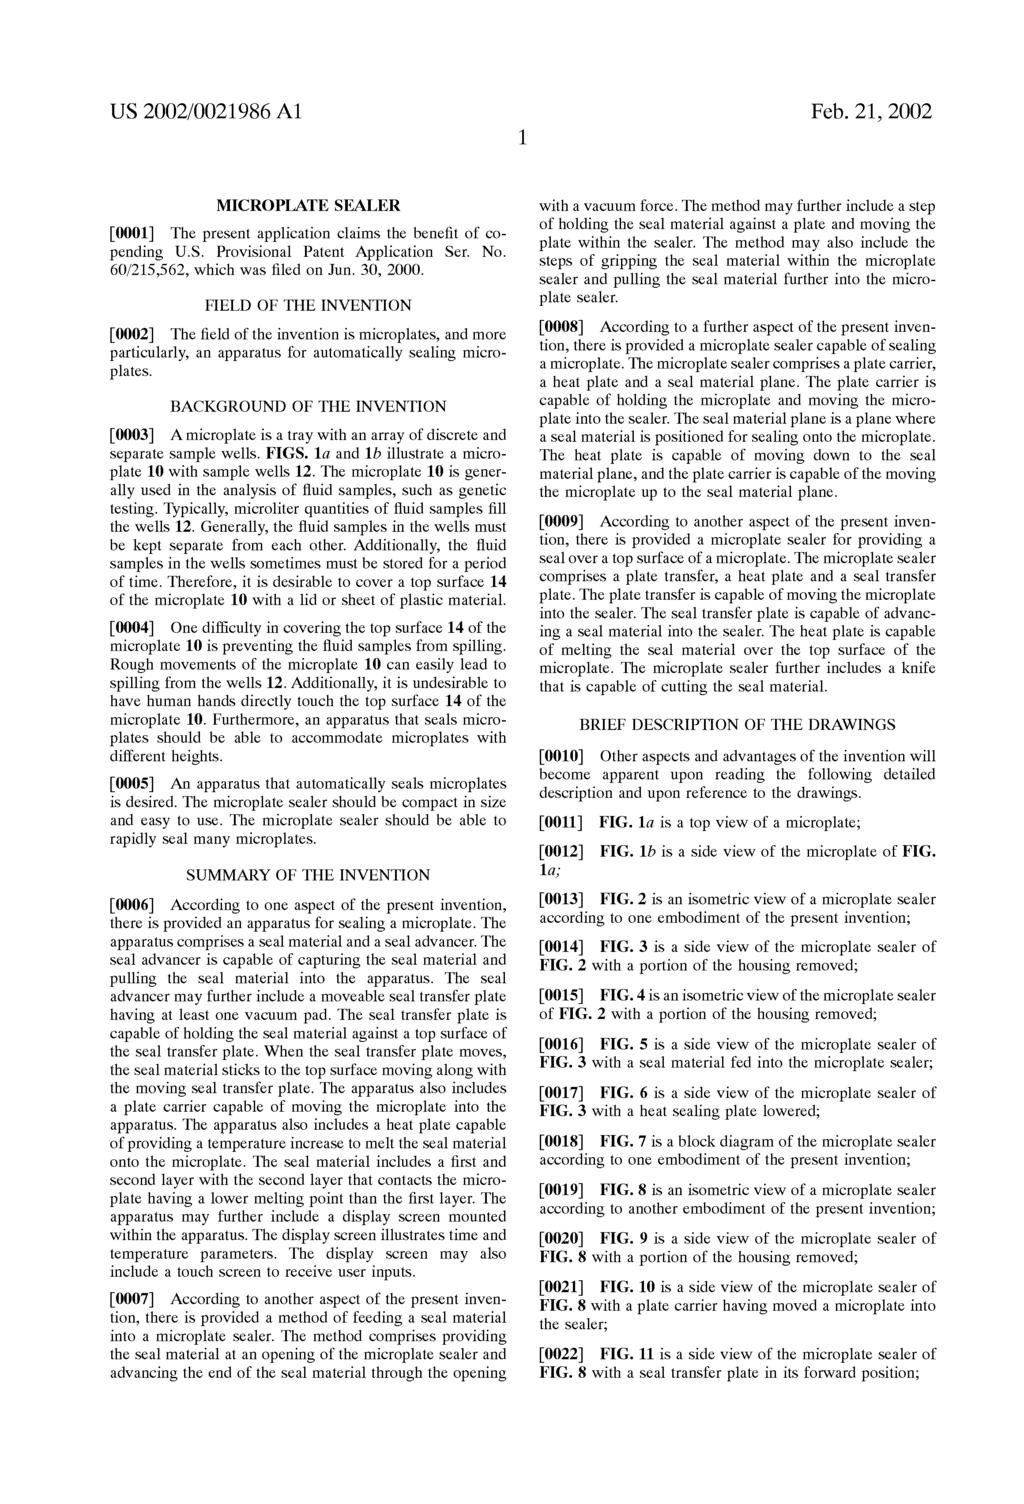 US 2002/0021986 A1 Feb. 21, 2002 MICROPLATE SEALER 0001. The present application claims the benefit of co pending U.S. Provisional Patent Application Ser. No. 60/215,562, which was filed on Jun.